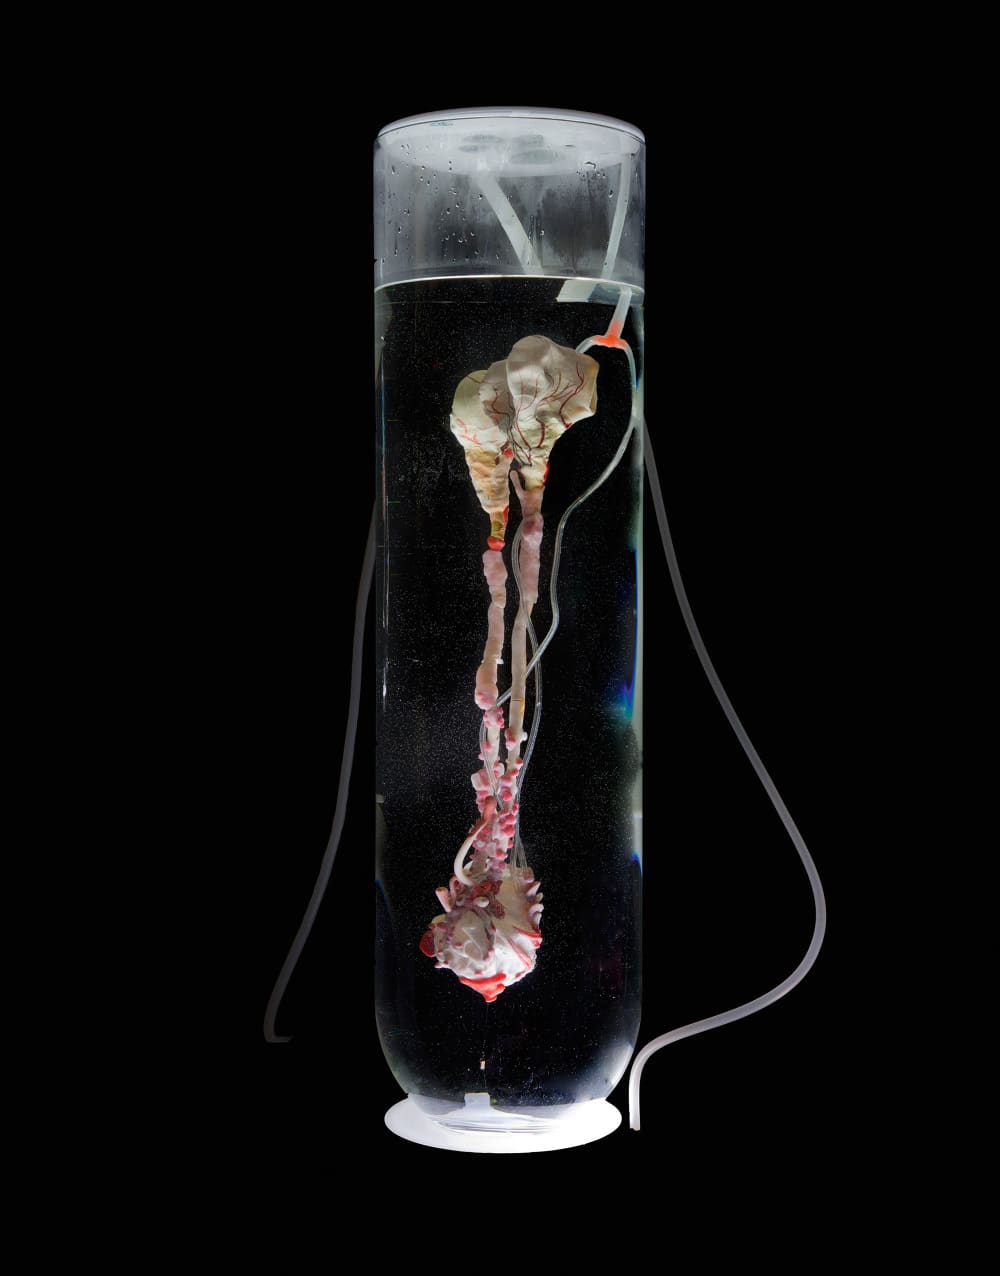 Artwort called »PetroNephros« that is part of the »Ecosystem of Excess« by Pinar Yoldas. You see a vessel filled with a clear liquid and an object that looks like an organ.